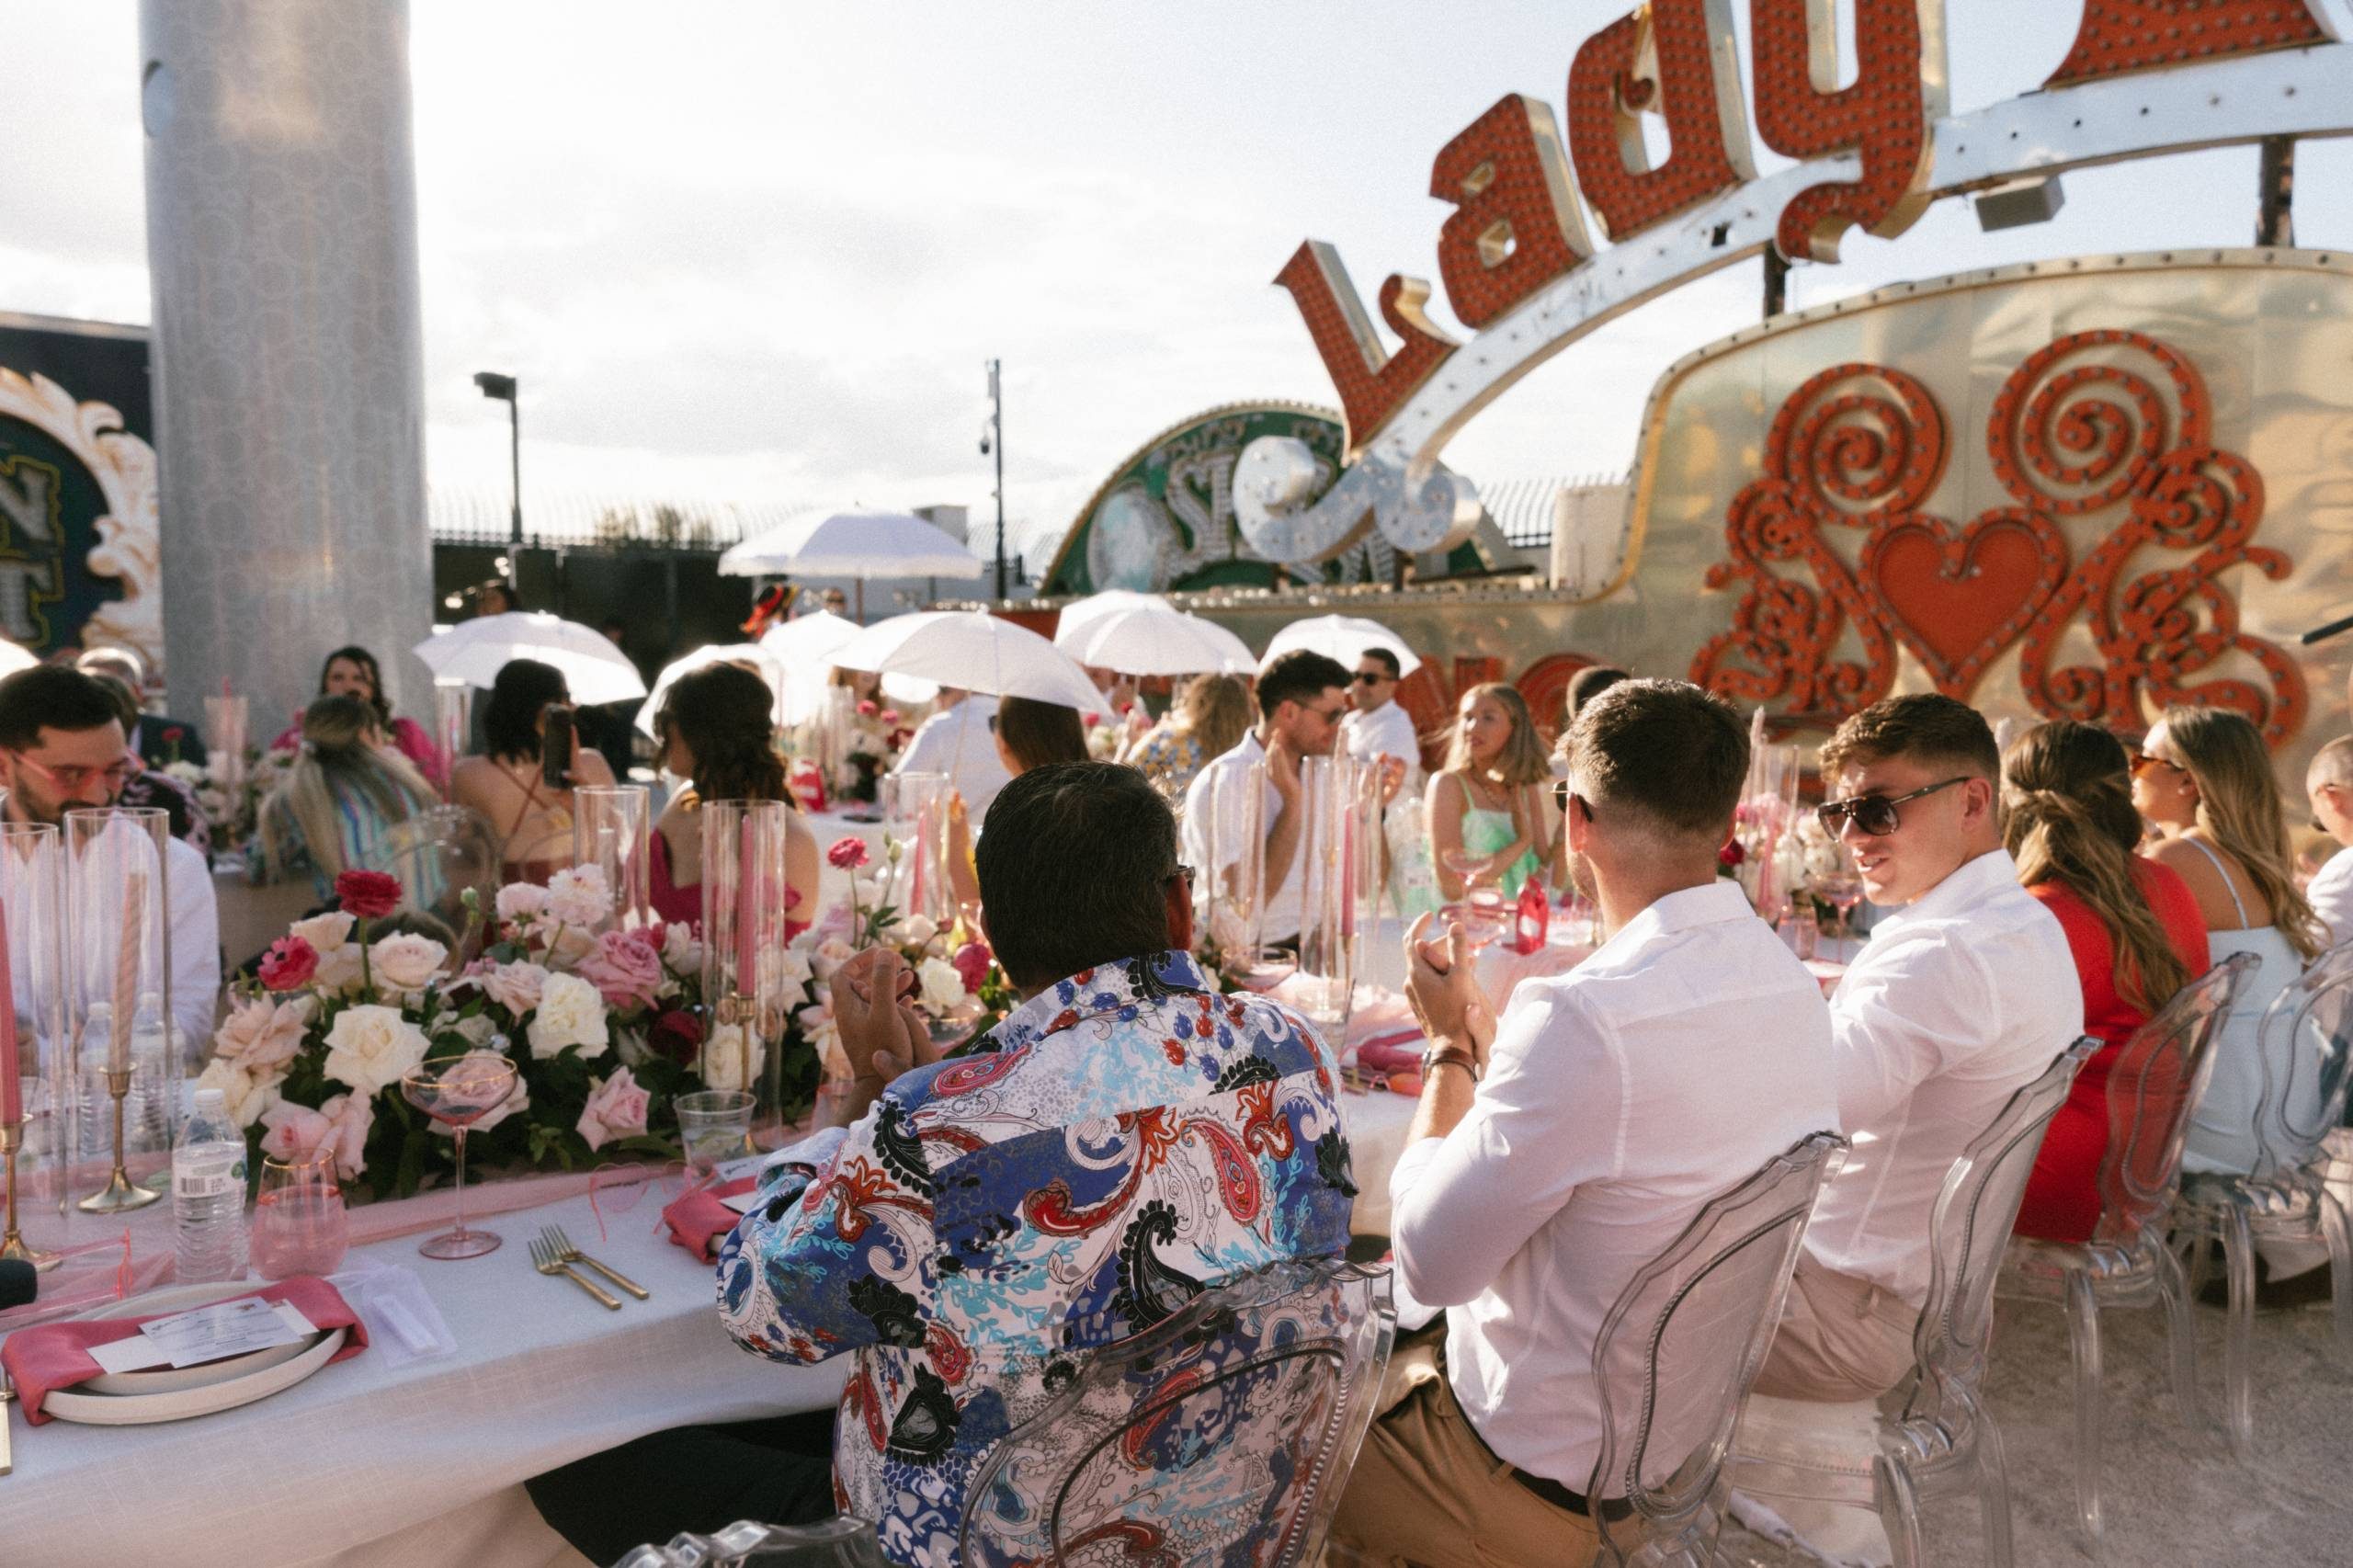 A group of people at a catered event at The Neon Museum's North Gallery.